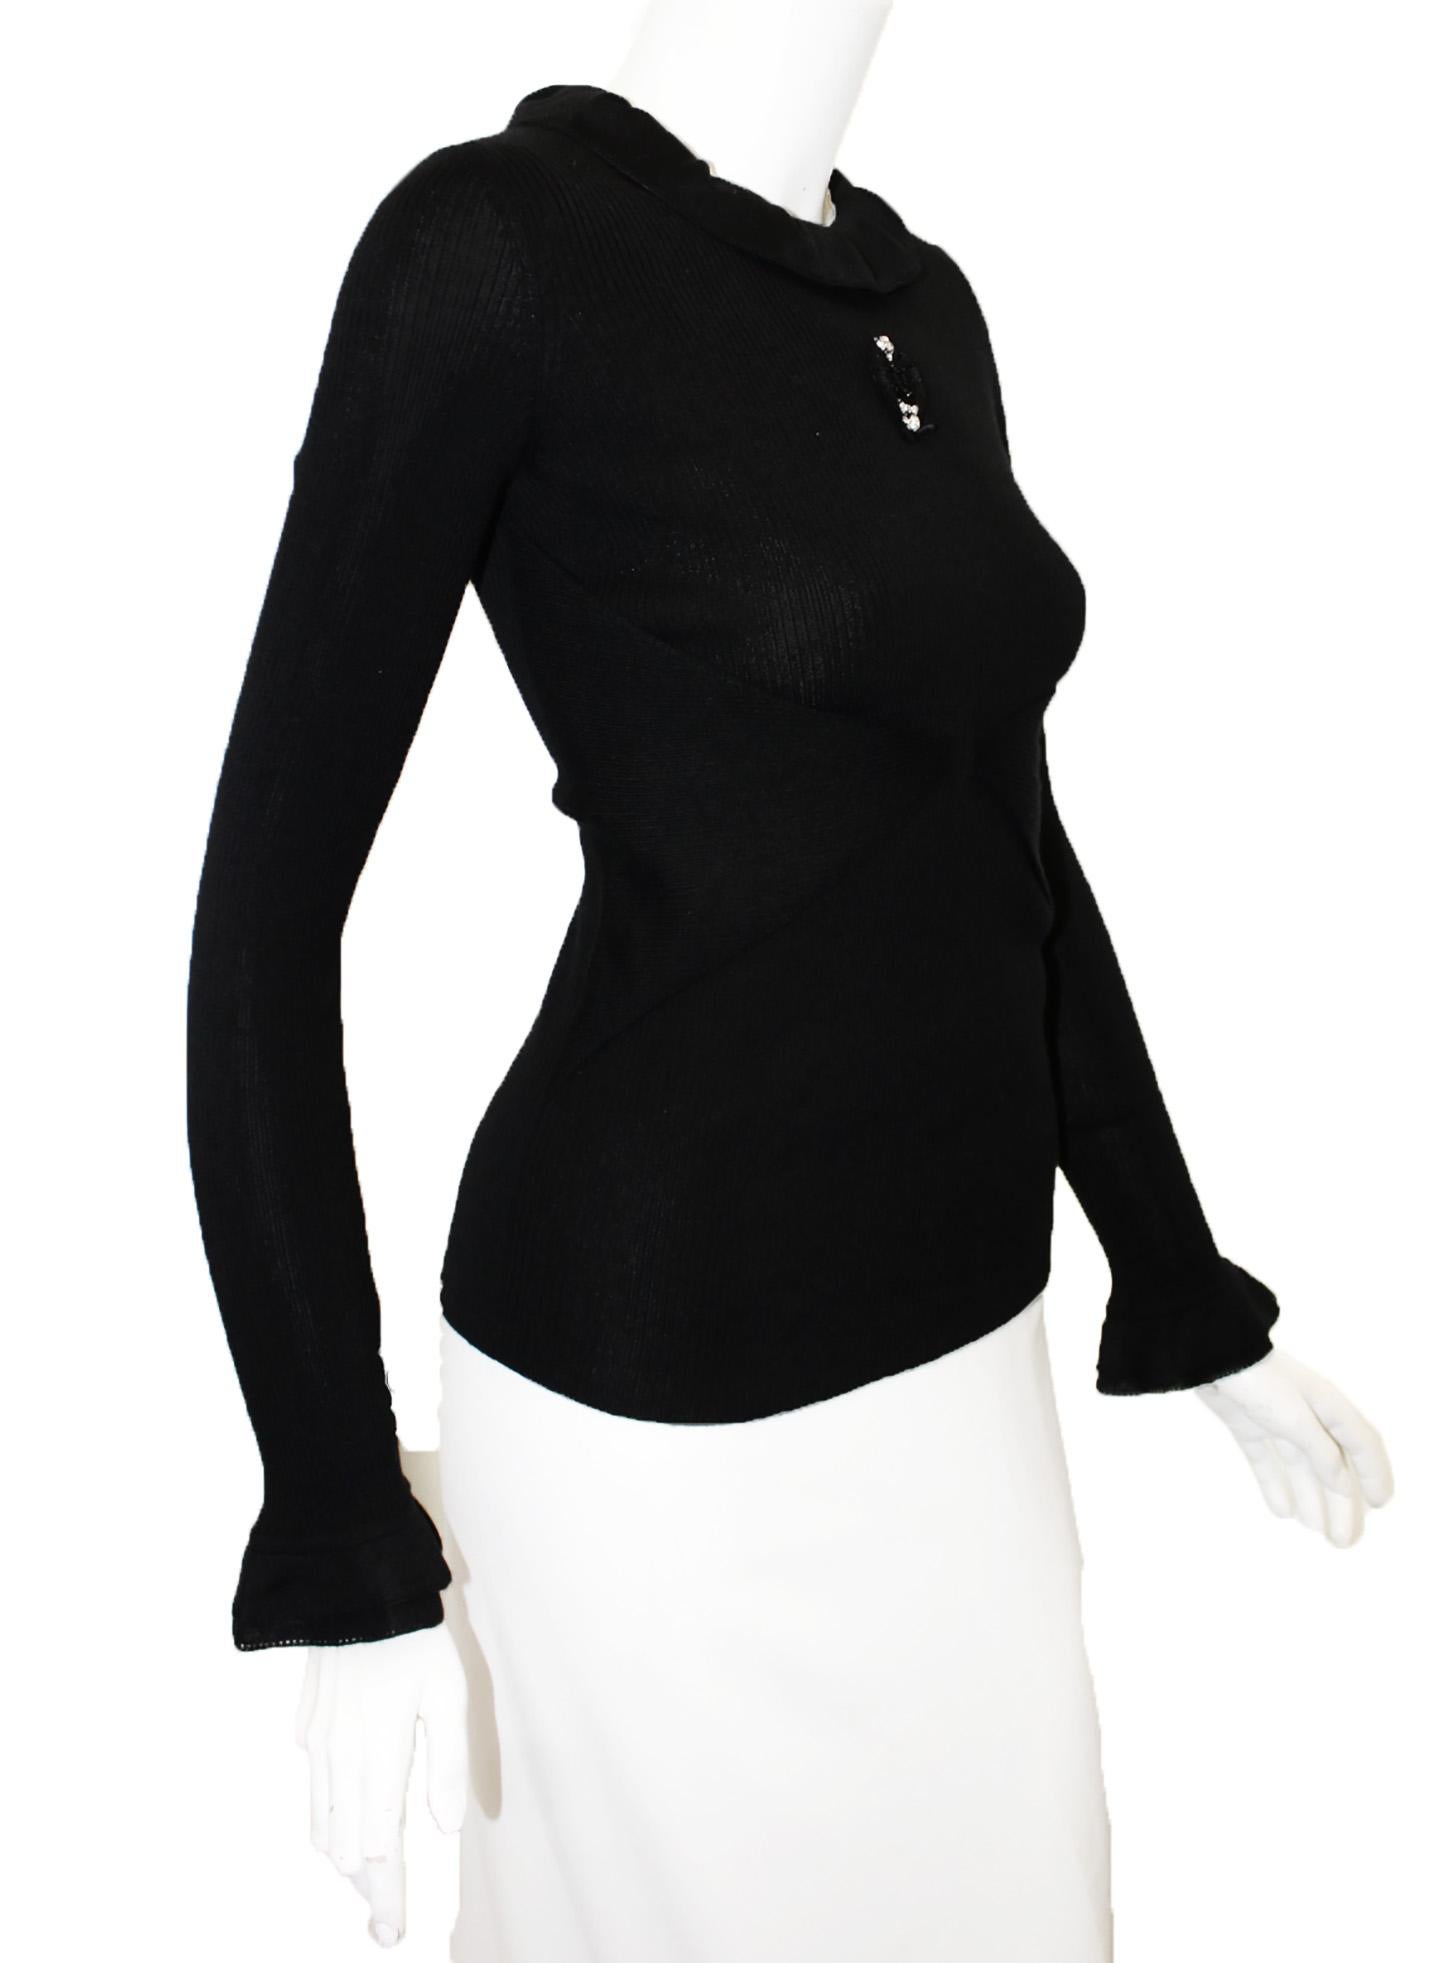 Chanel black long sleeve lightweight cashmere top incorporates a ruffled collar, and, ruffled cuffs.  With knit panels at the waist that unite at center of top.  Includes a grosgrain medallion with interlocking CC embellished in black and clear